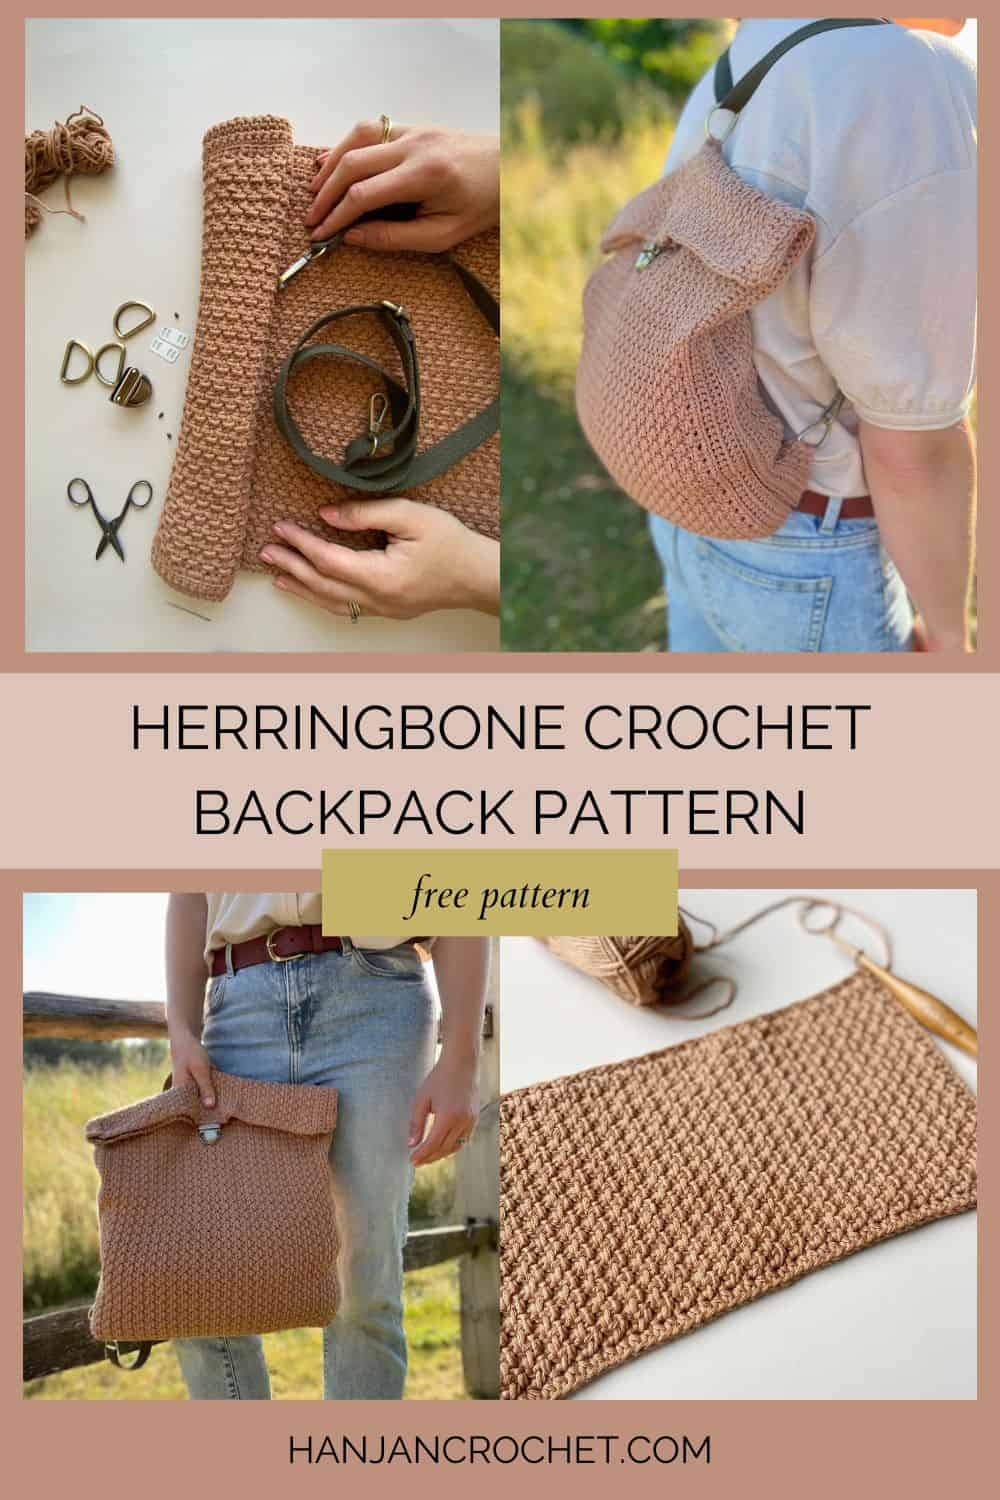 4 images of crochet backpack pattern.